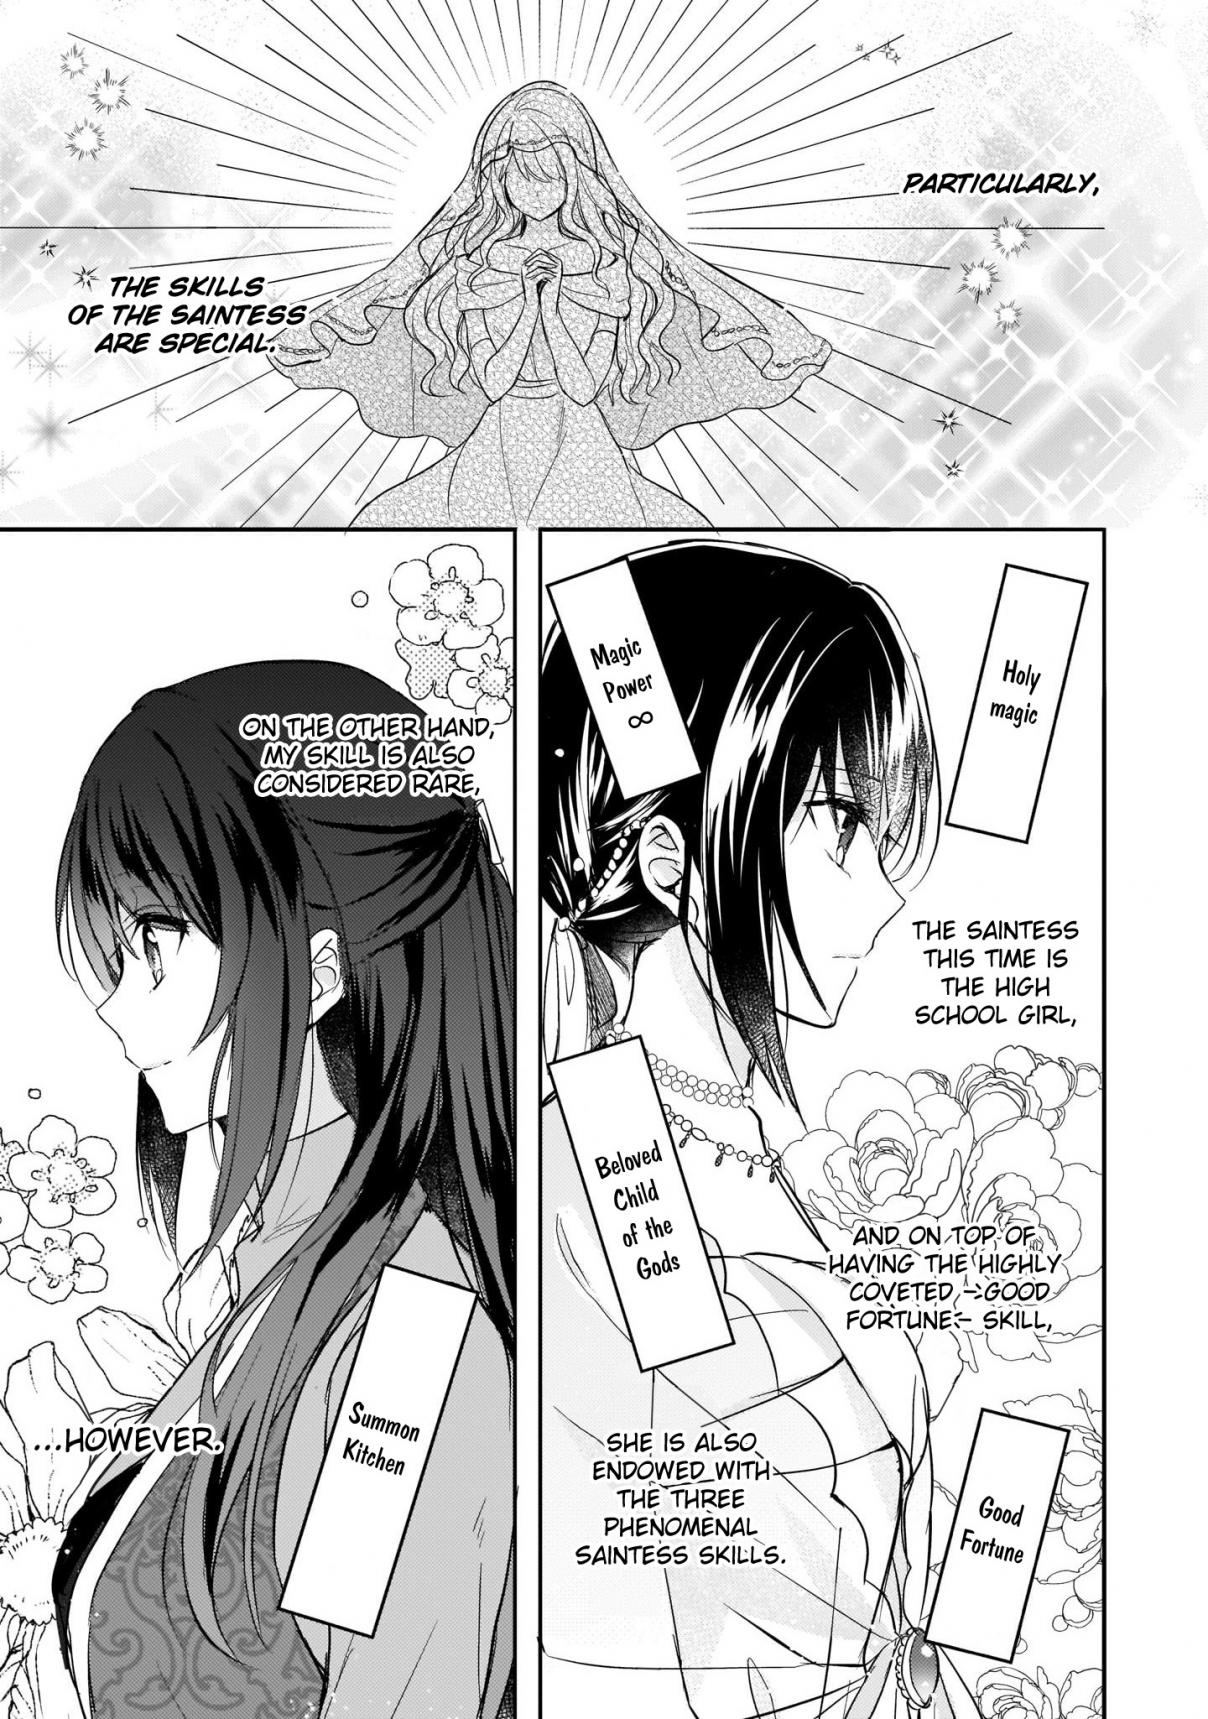 This "Summon Kitchen" Skill is Amazing! ~Amassing Points By Cooking in Another World~ Vol. 1 Ch. 2